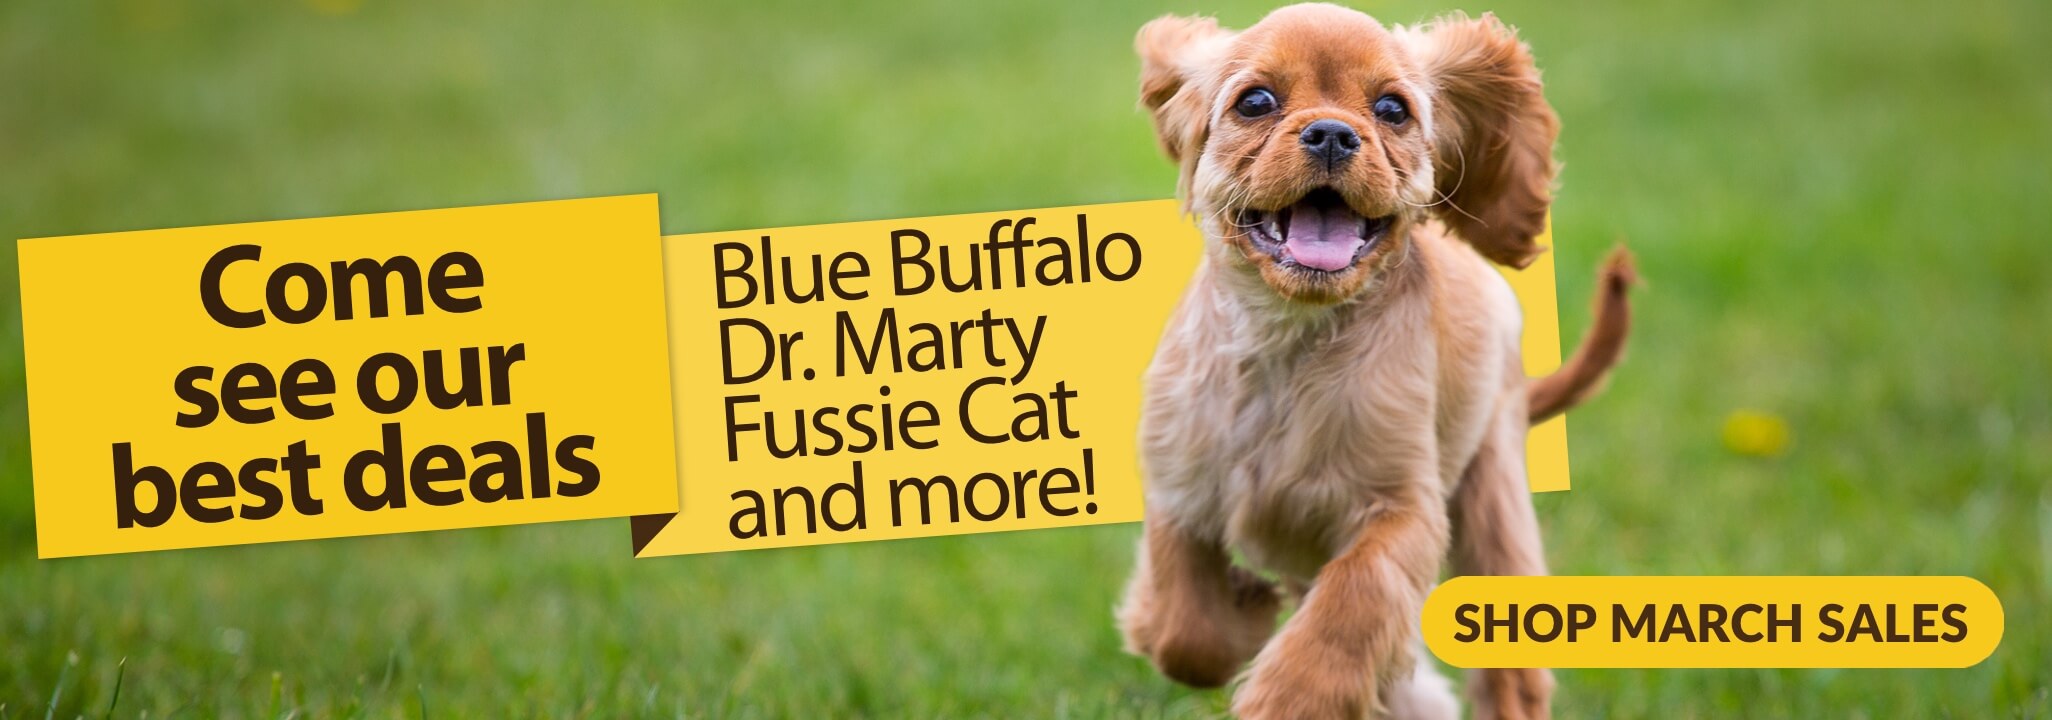 Come see our best deals Blue Buffalo, Dr. Marty, Fussie Cat, and more